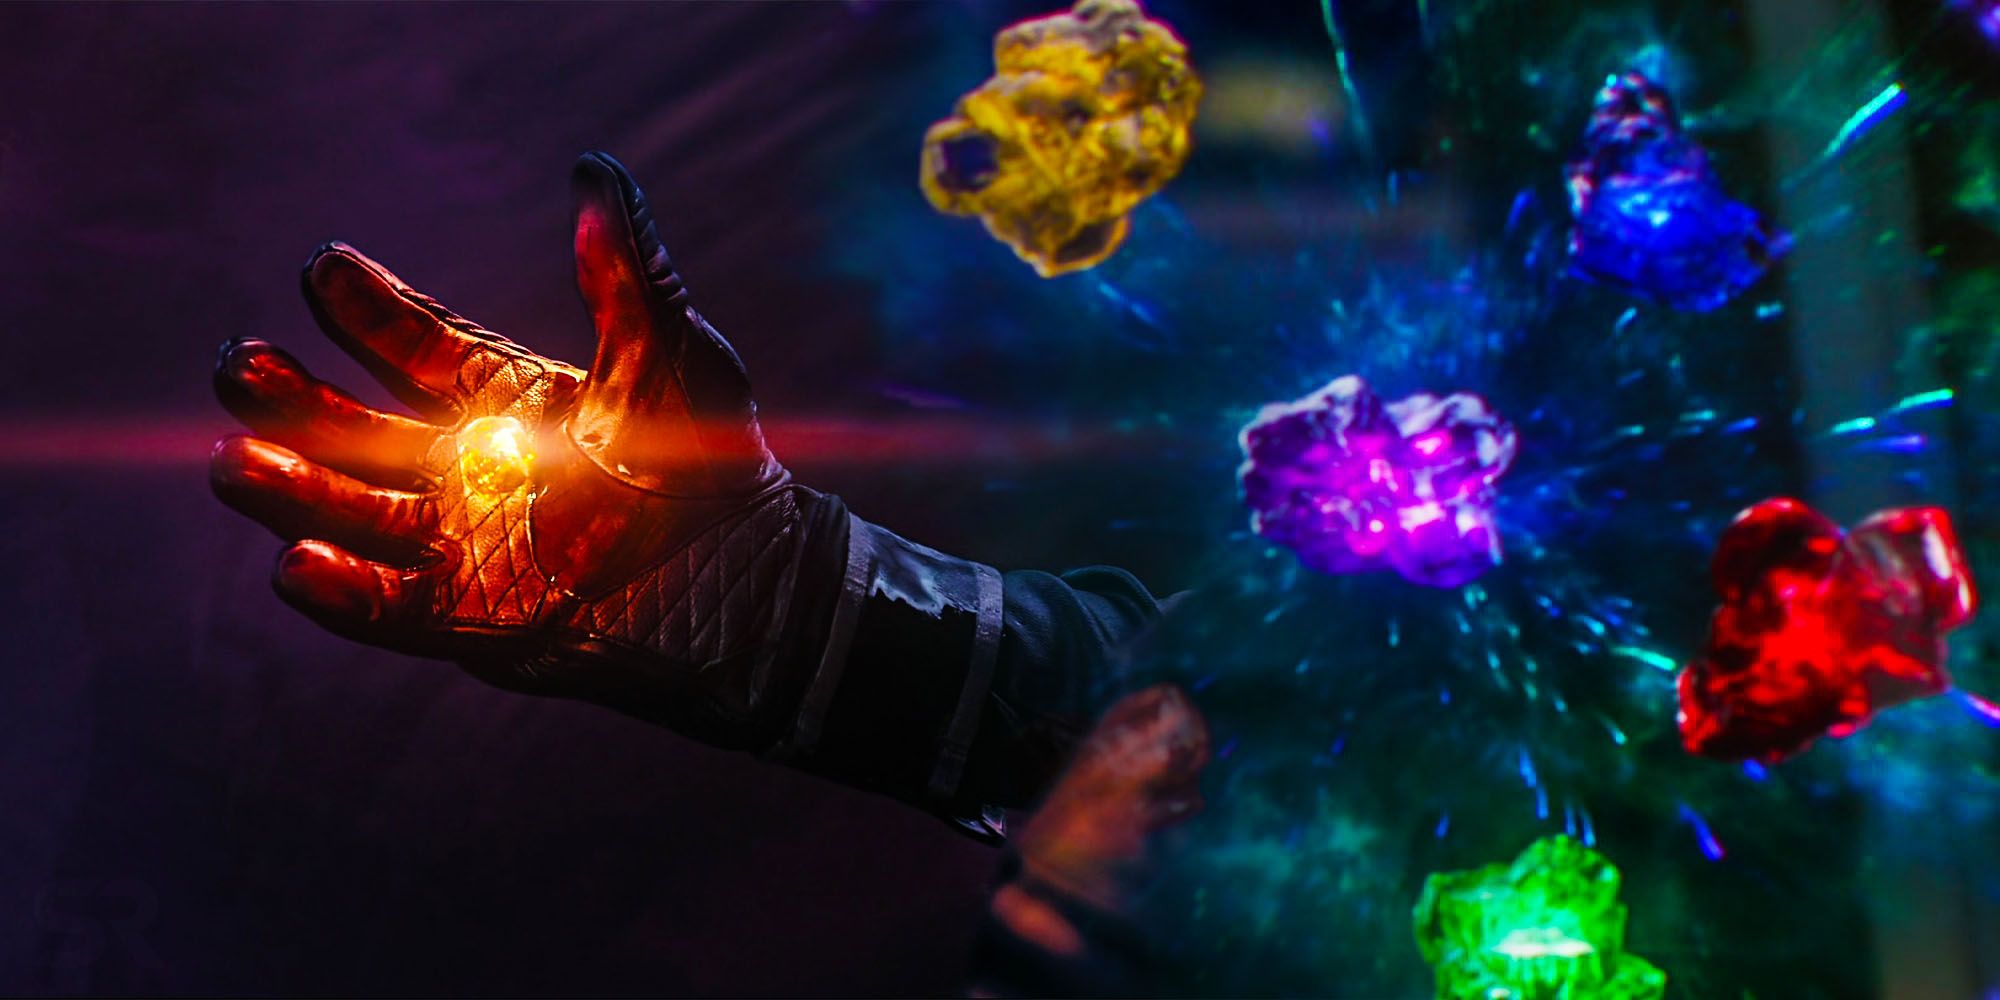 Avengers endgame soul stone only infinity stone without a phase 4 replacement